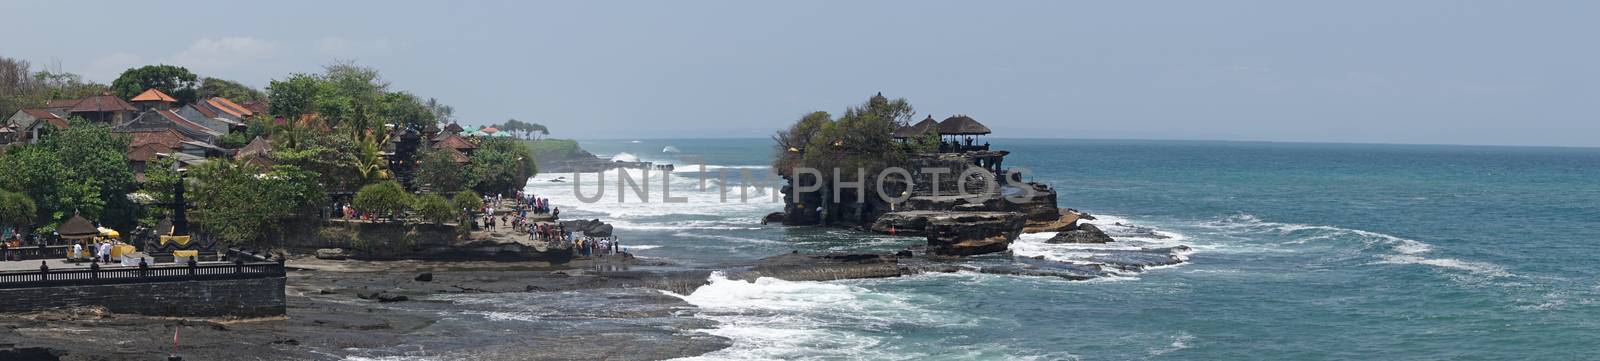 Tanah Lot Temple, Bali, Indonesia by alfotokunst